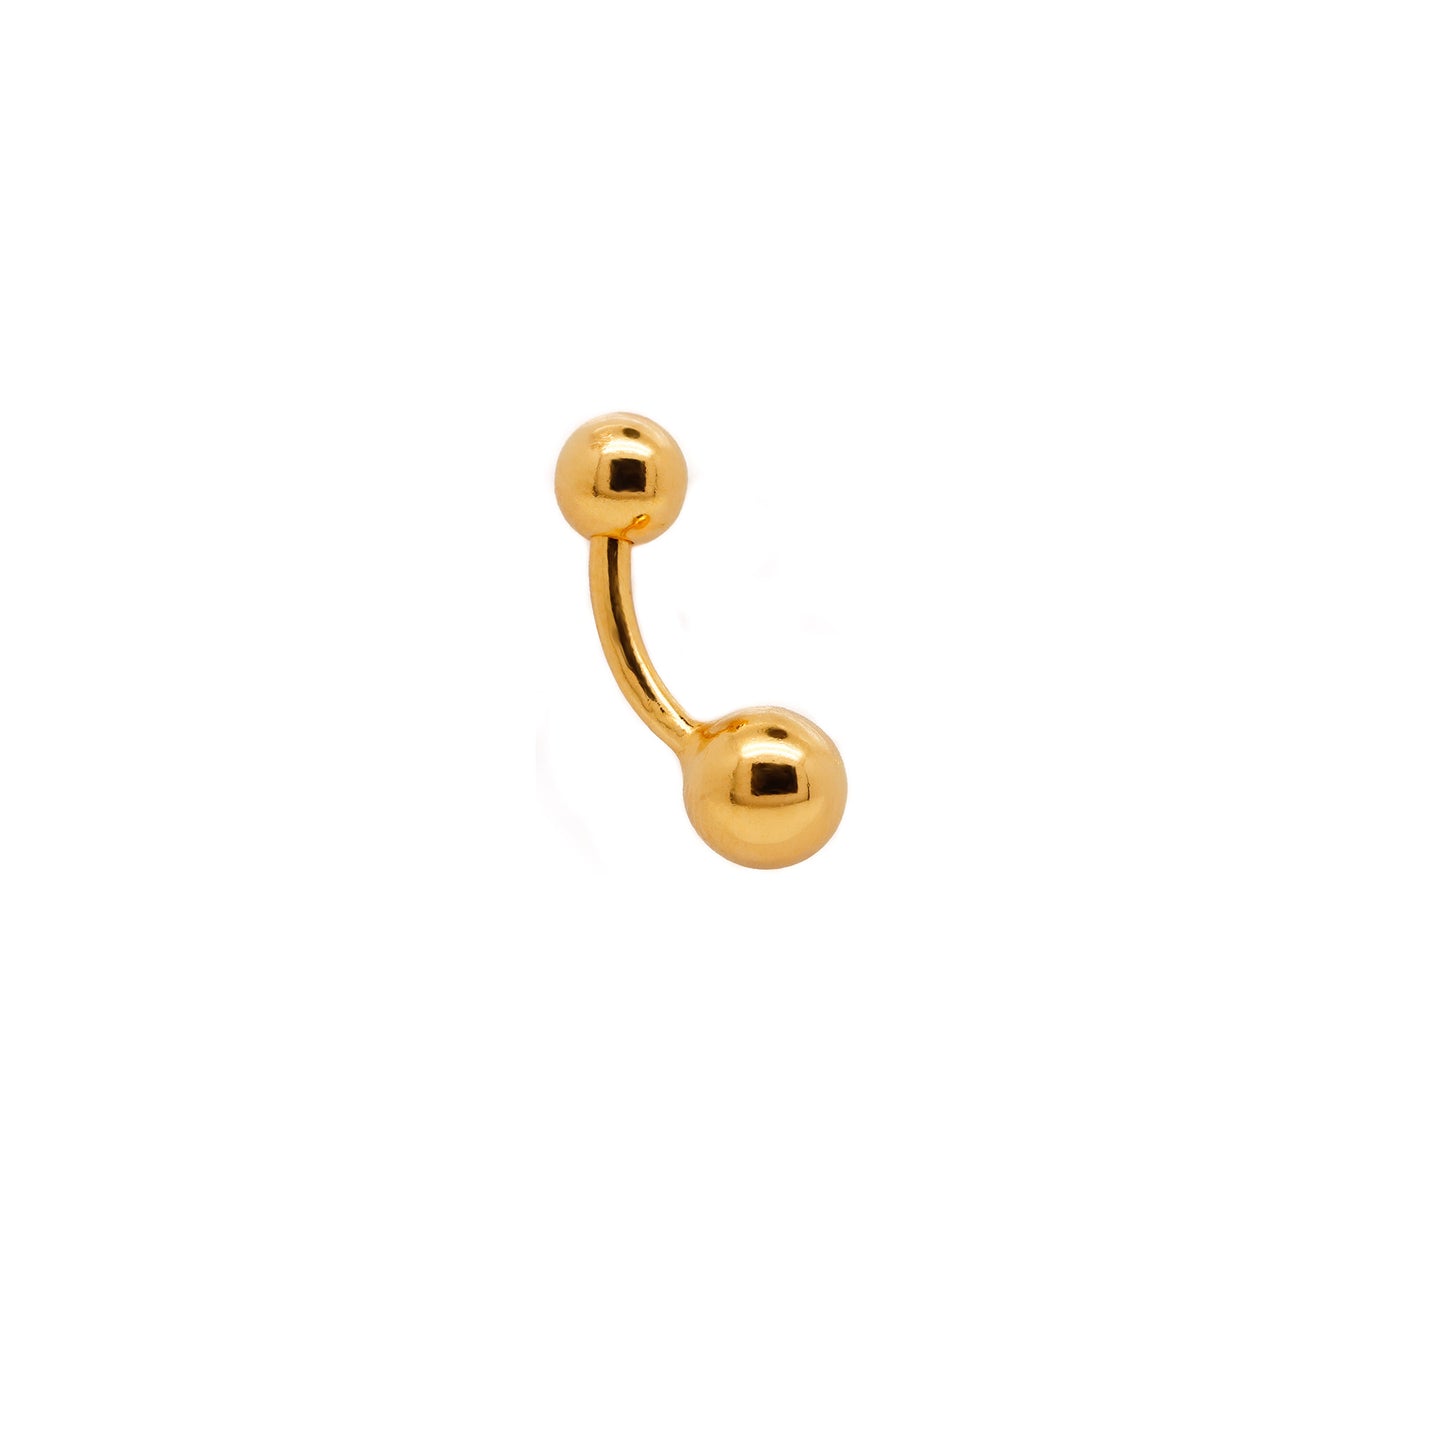 Vermeil | 925 Silver 24k Gold Coated Small Ball Combination Belly Ring | 6mm 1/4" 8mm 5/16" 10mm 3/8" - Sturdy South